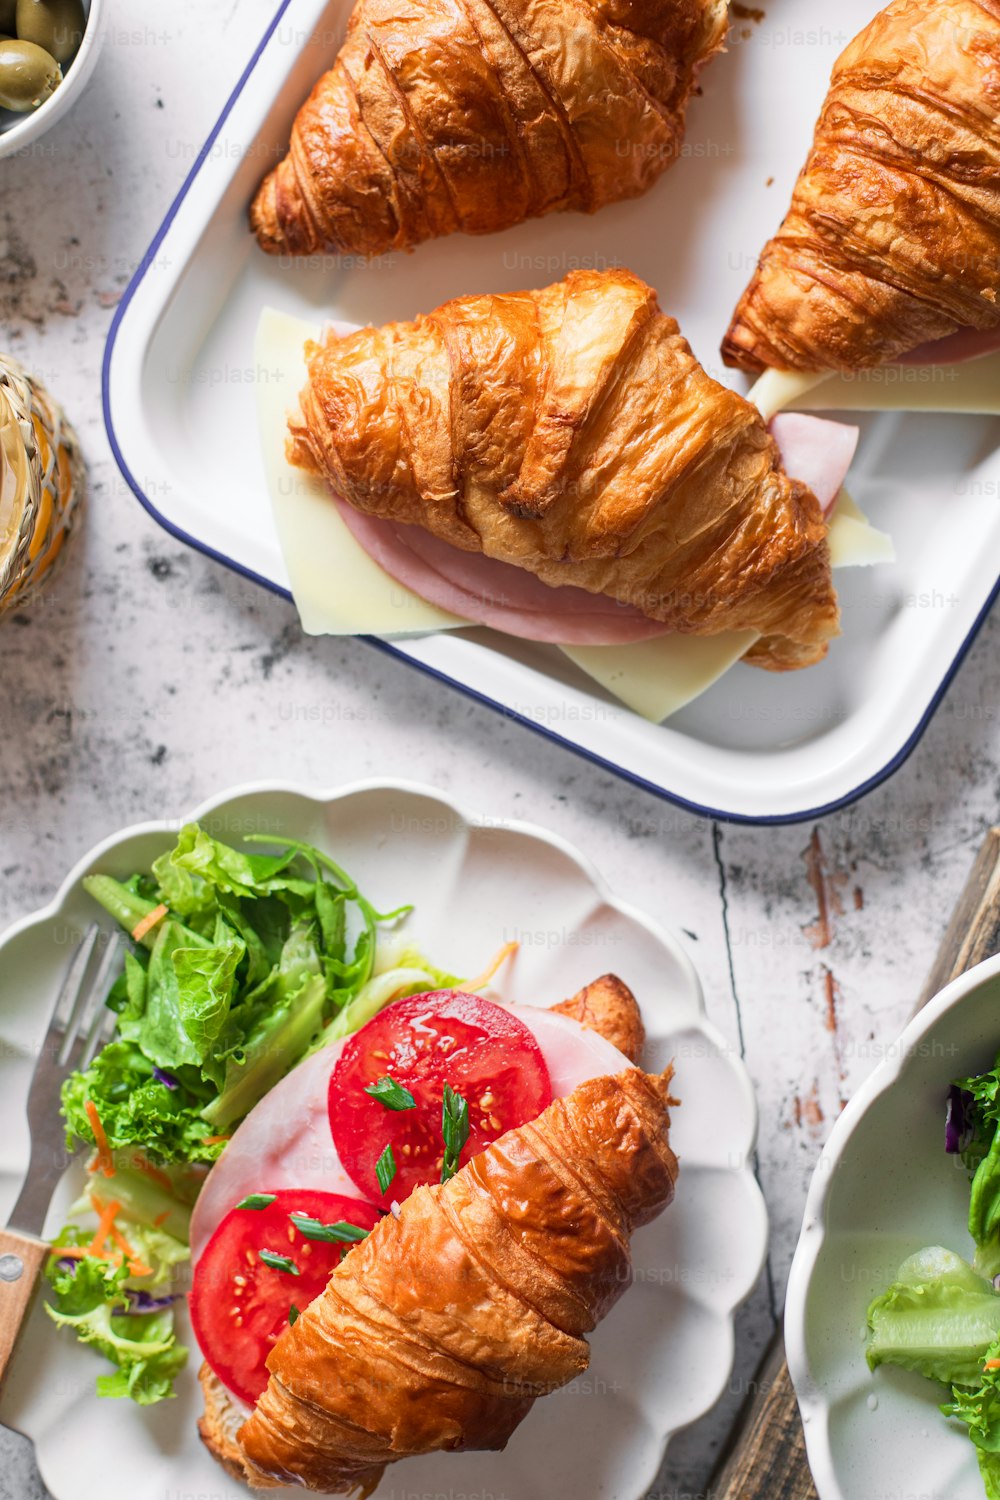 croissants, salad, and bread on plates on a table